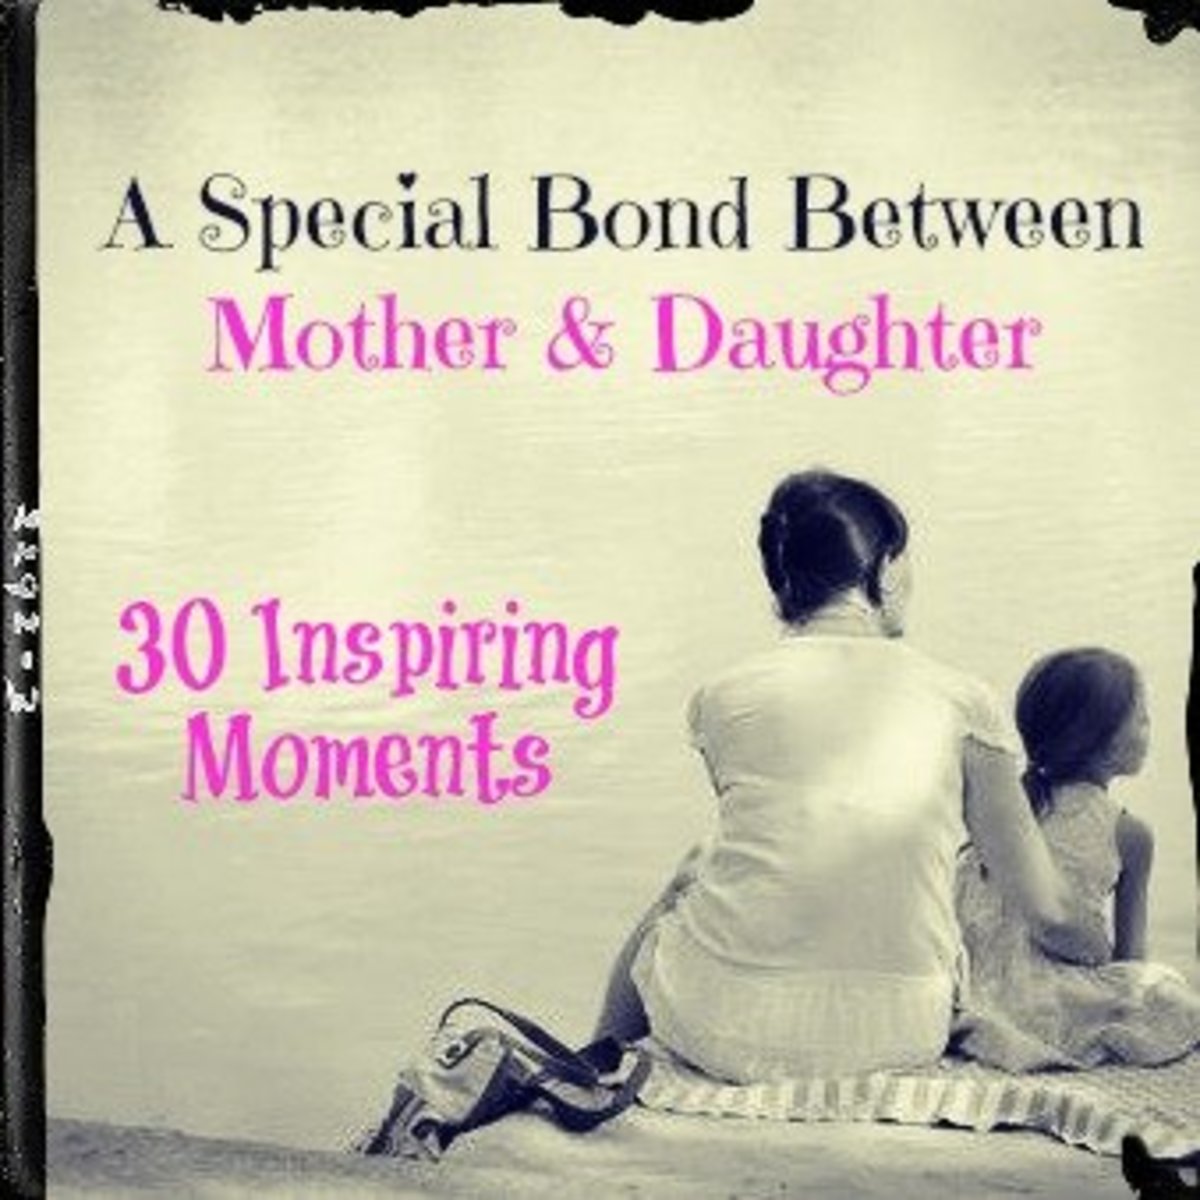 The Special Bond Between Mothers And Daughters | HubPages